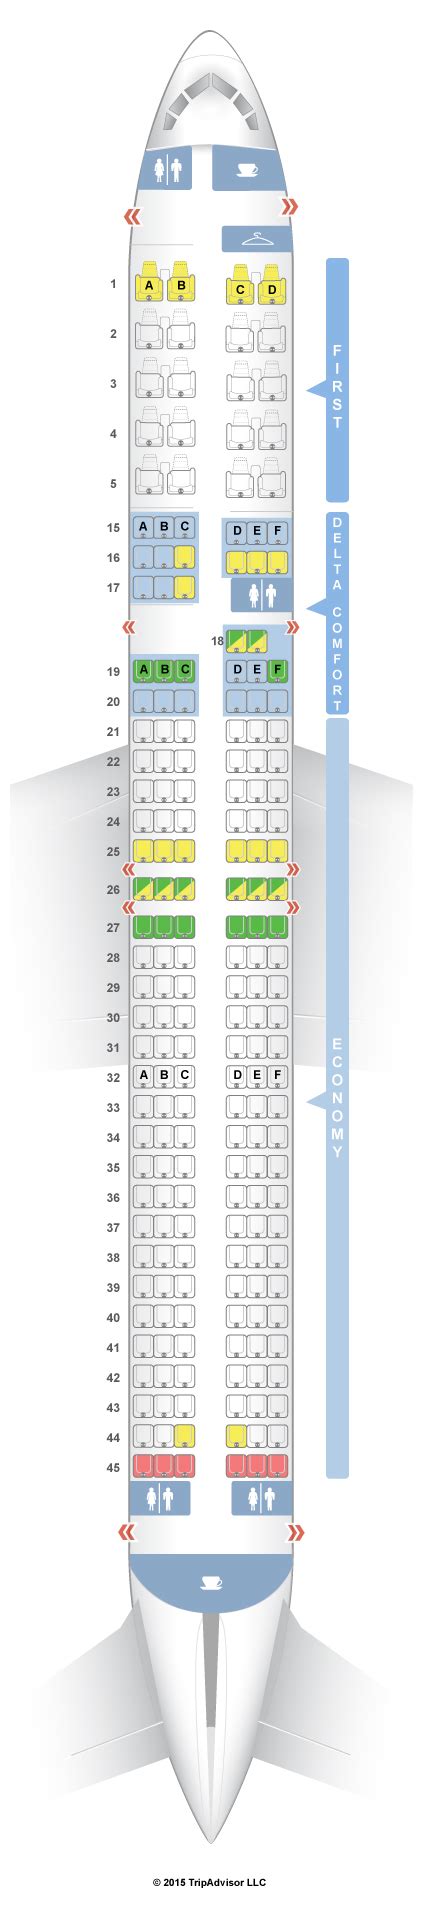 Delta Airlines Seat Map 757